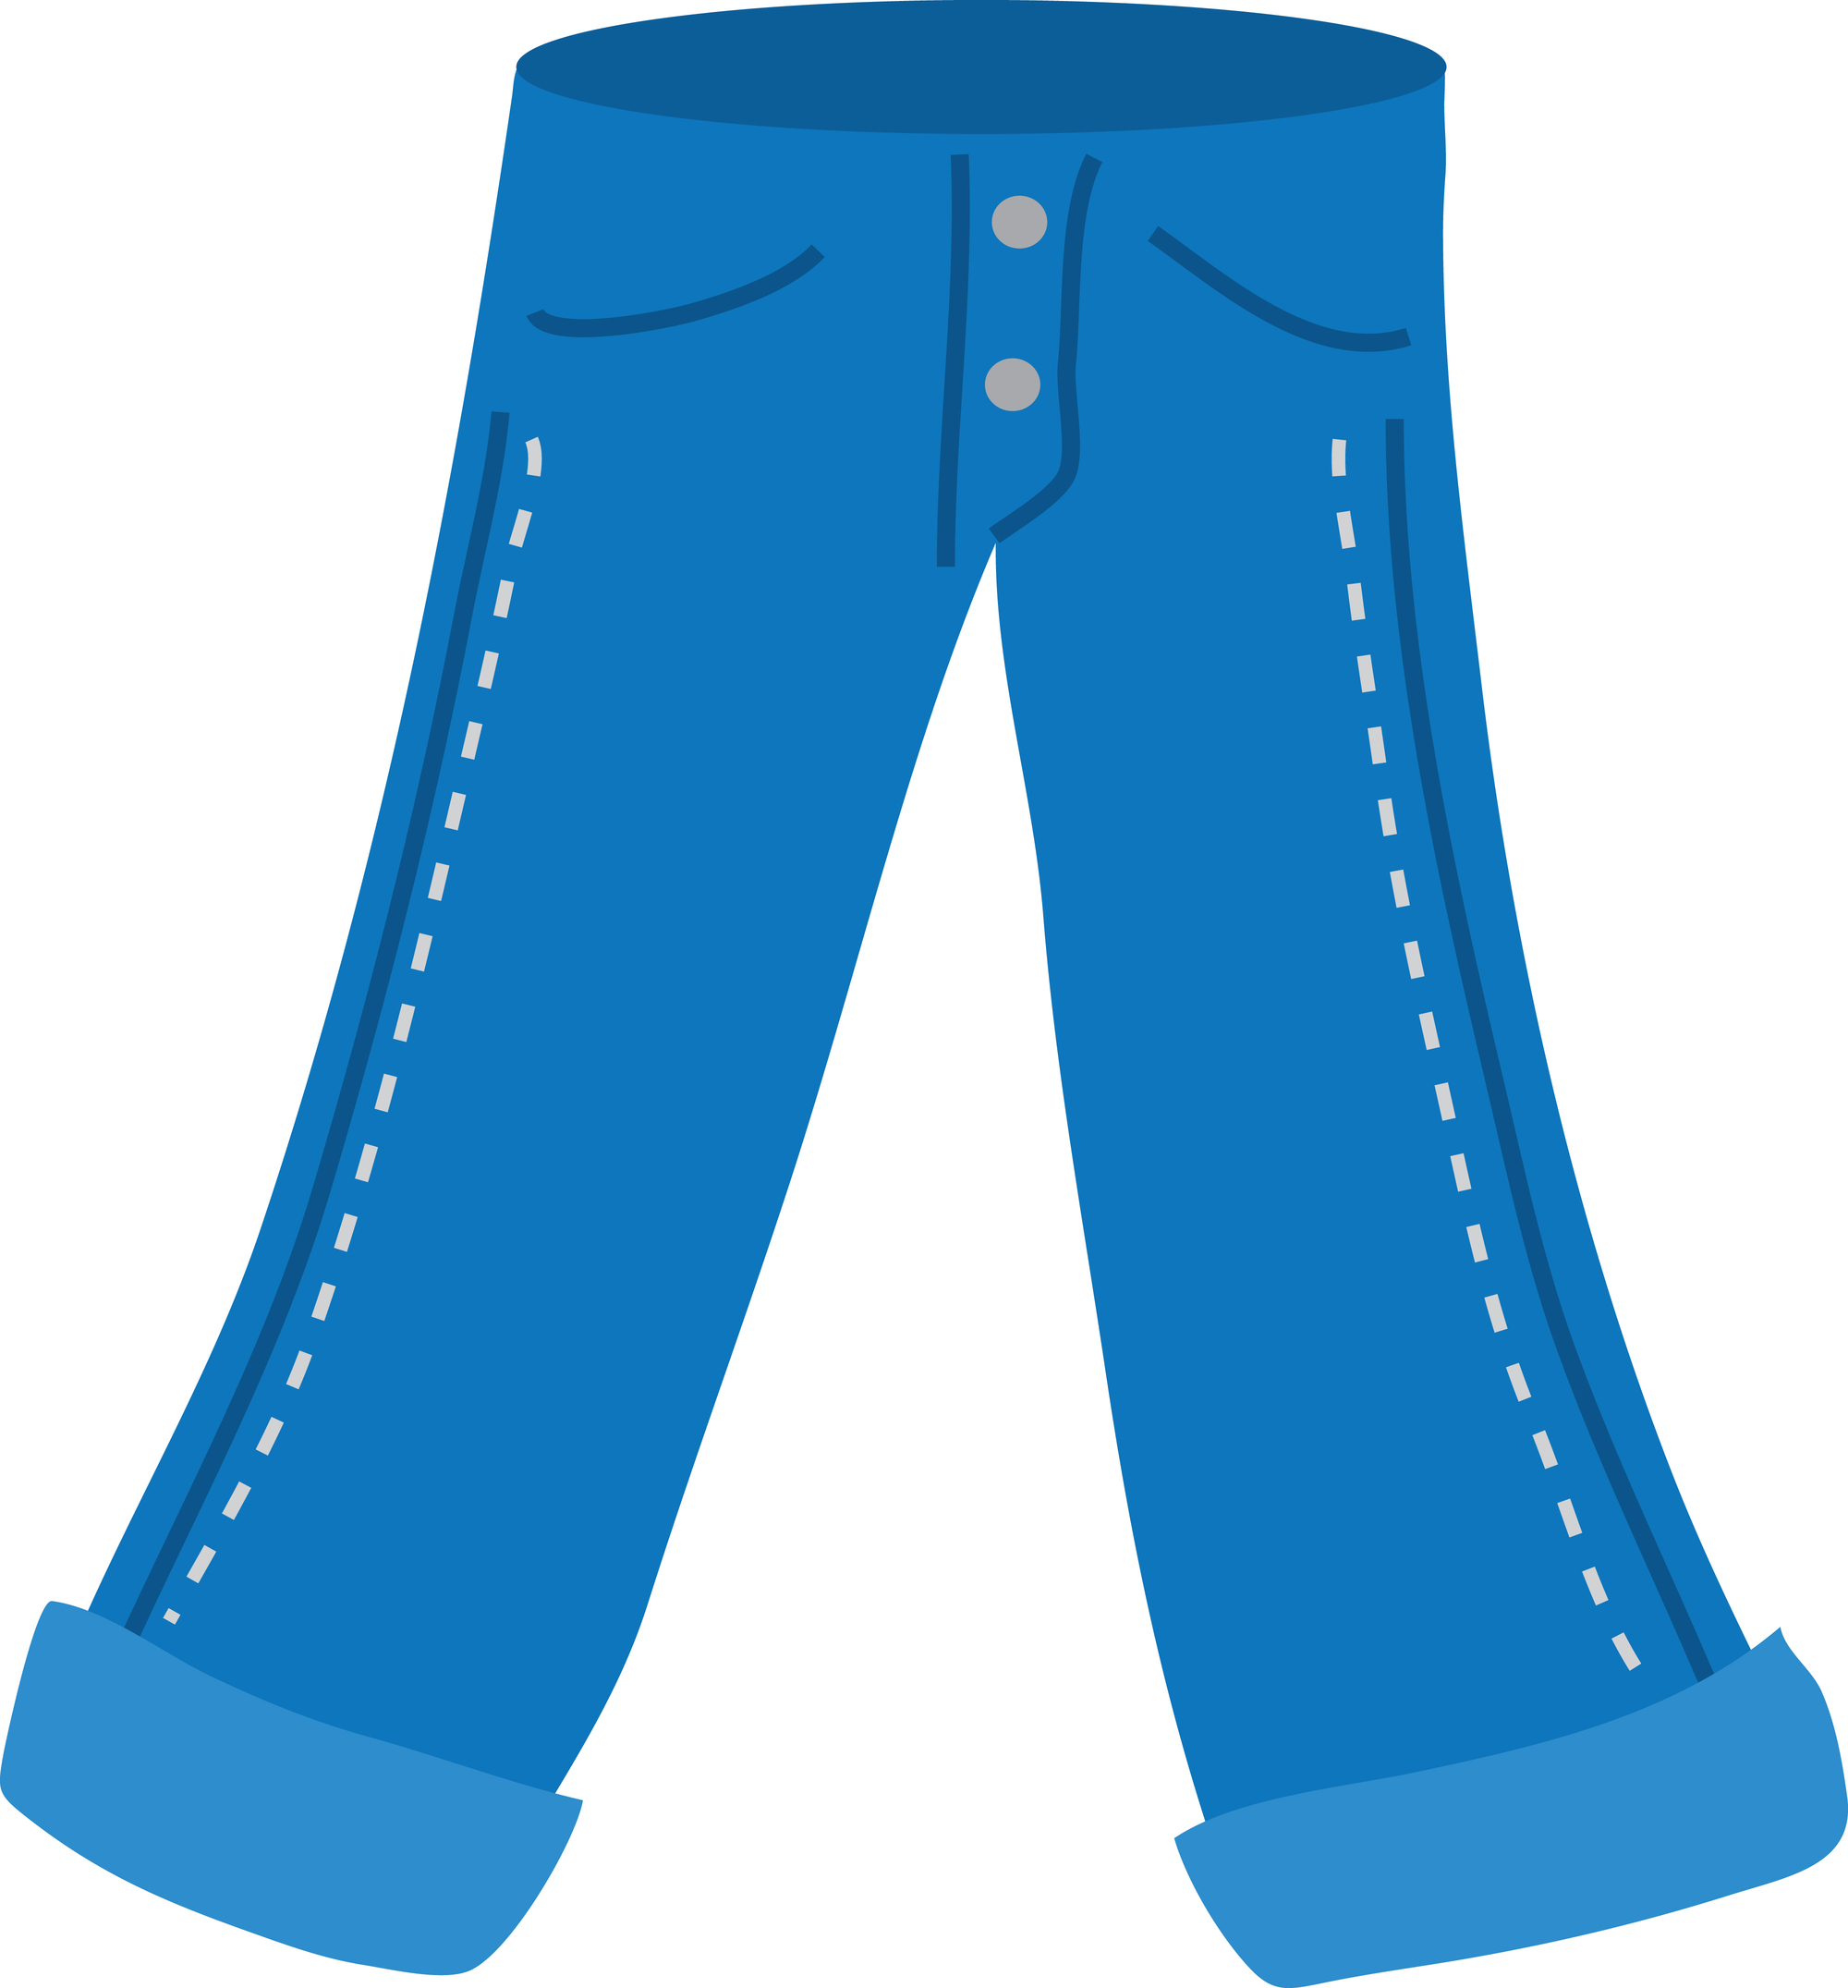 Jeans Free Clipart   Free Clip Art Images